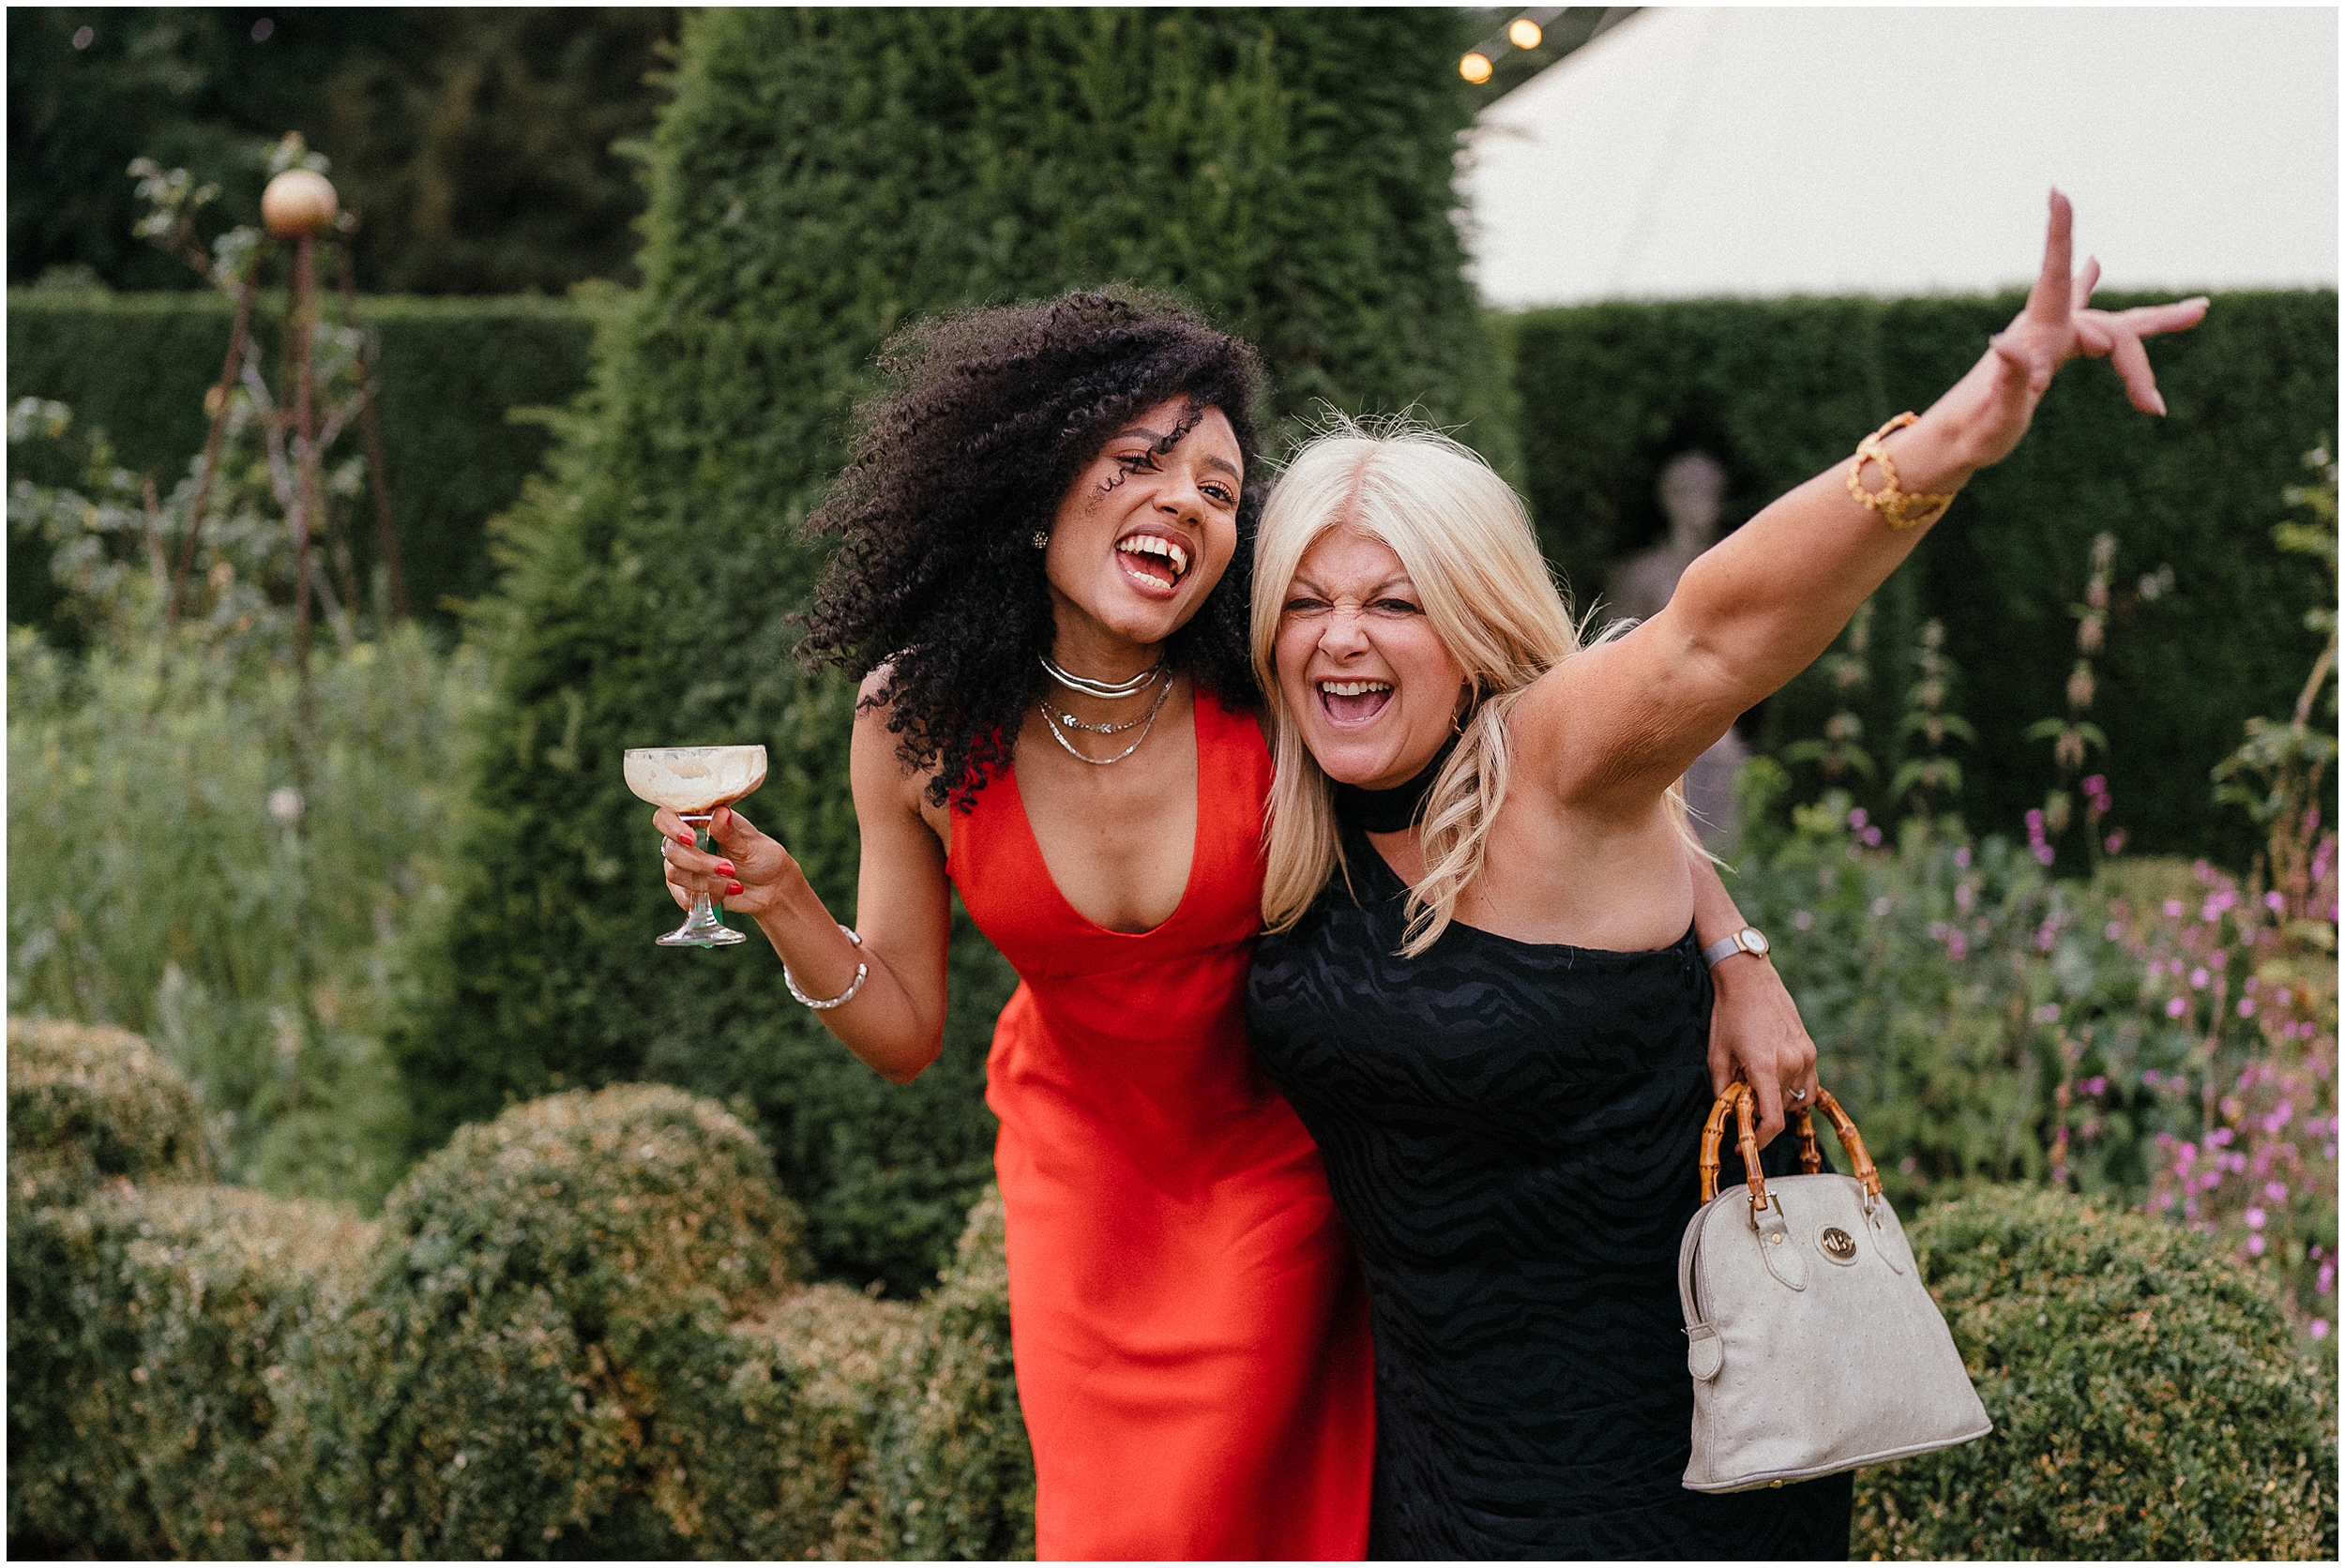 Wedding guests having fun during a wedding at the Old Rectory Estate.